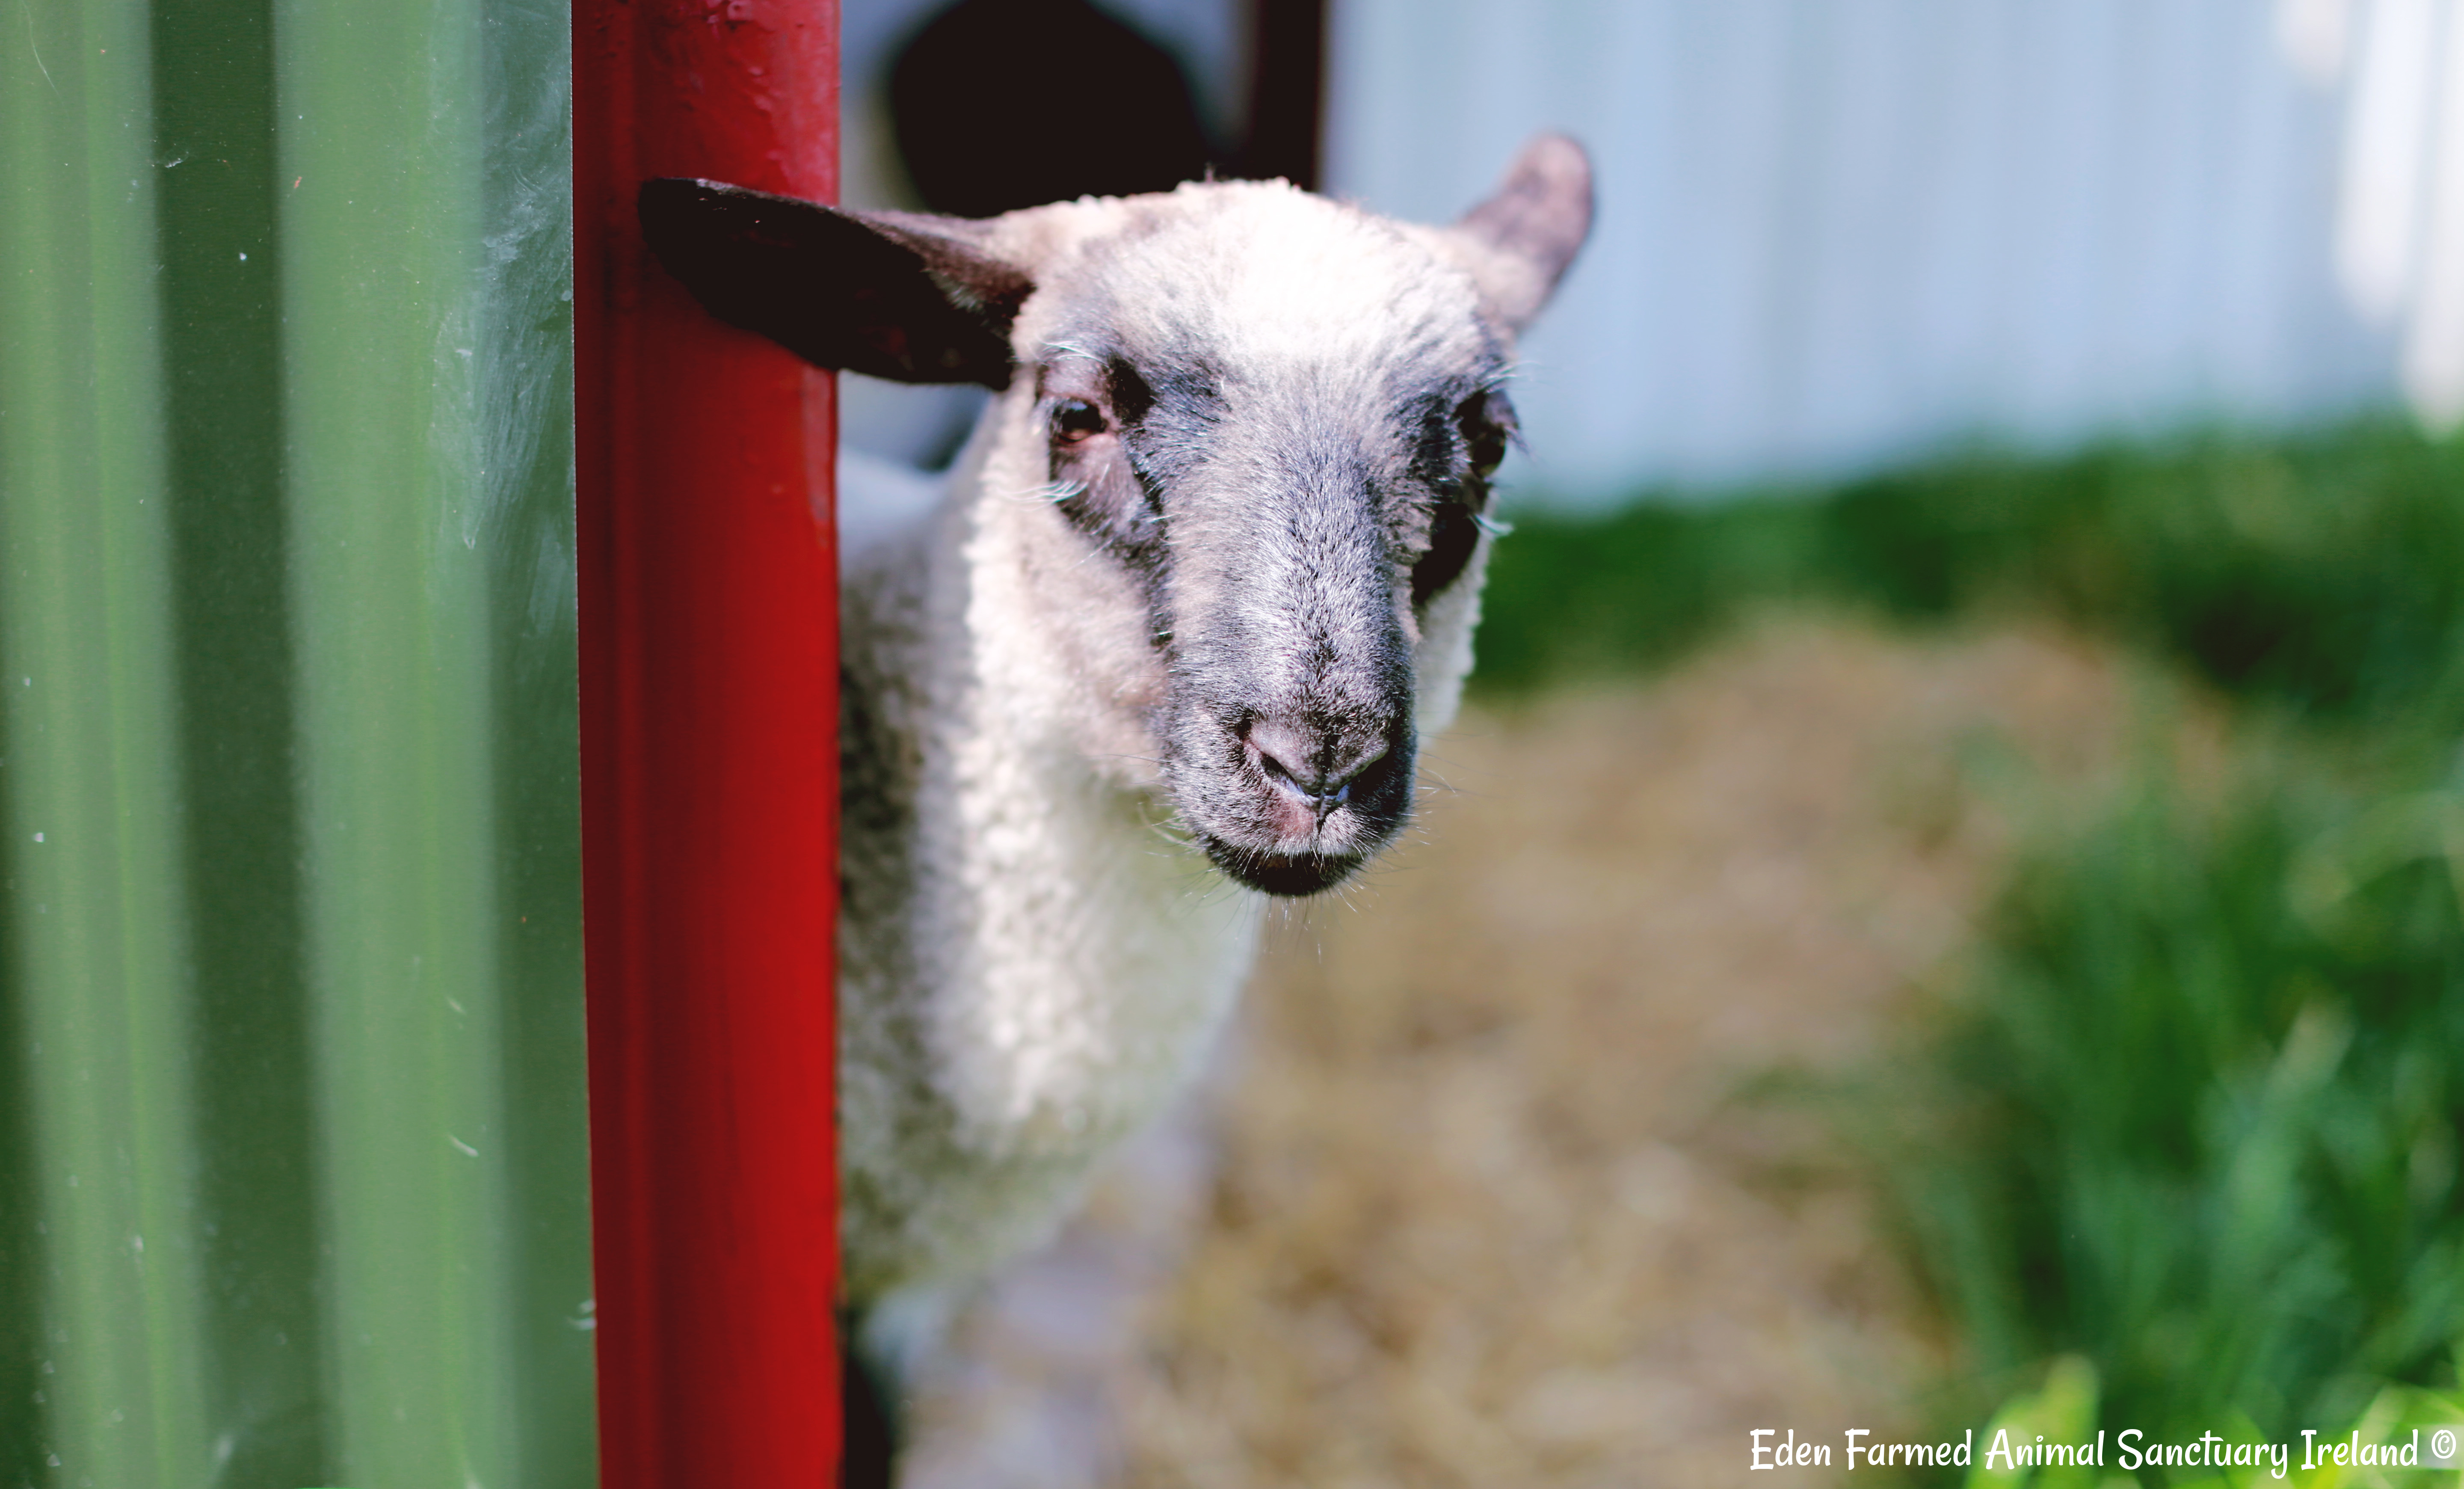 Rescued sheep Annie looking at you at Eden Farmed Animal Sanctuary in Ireland